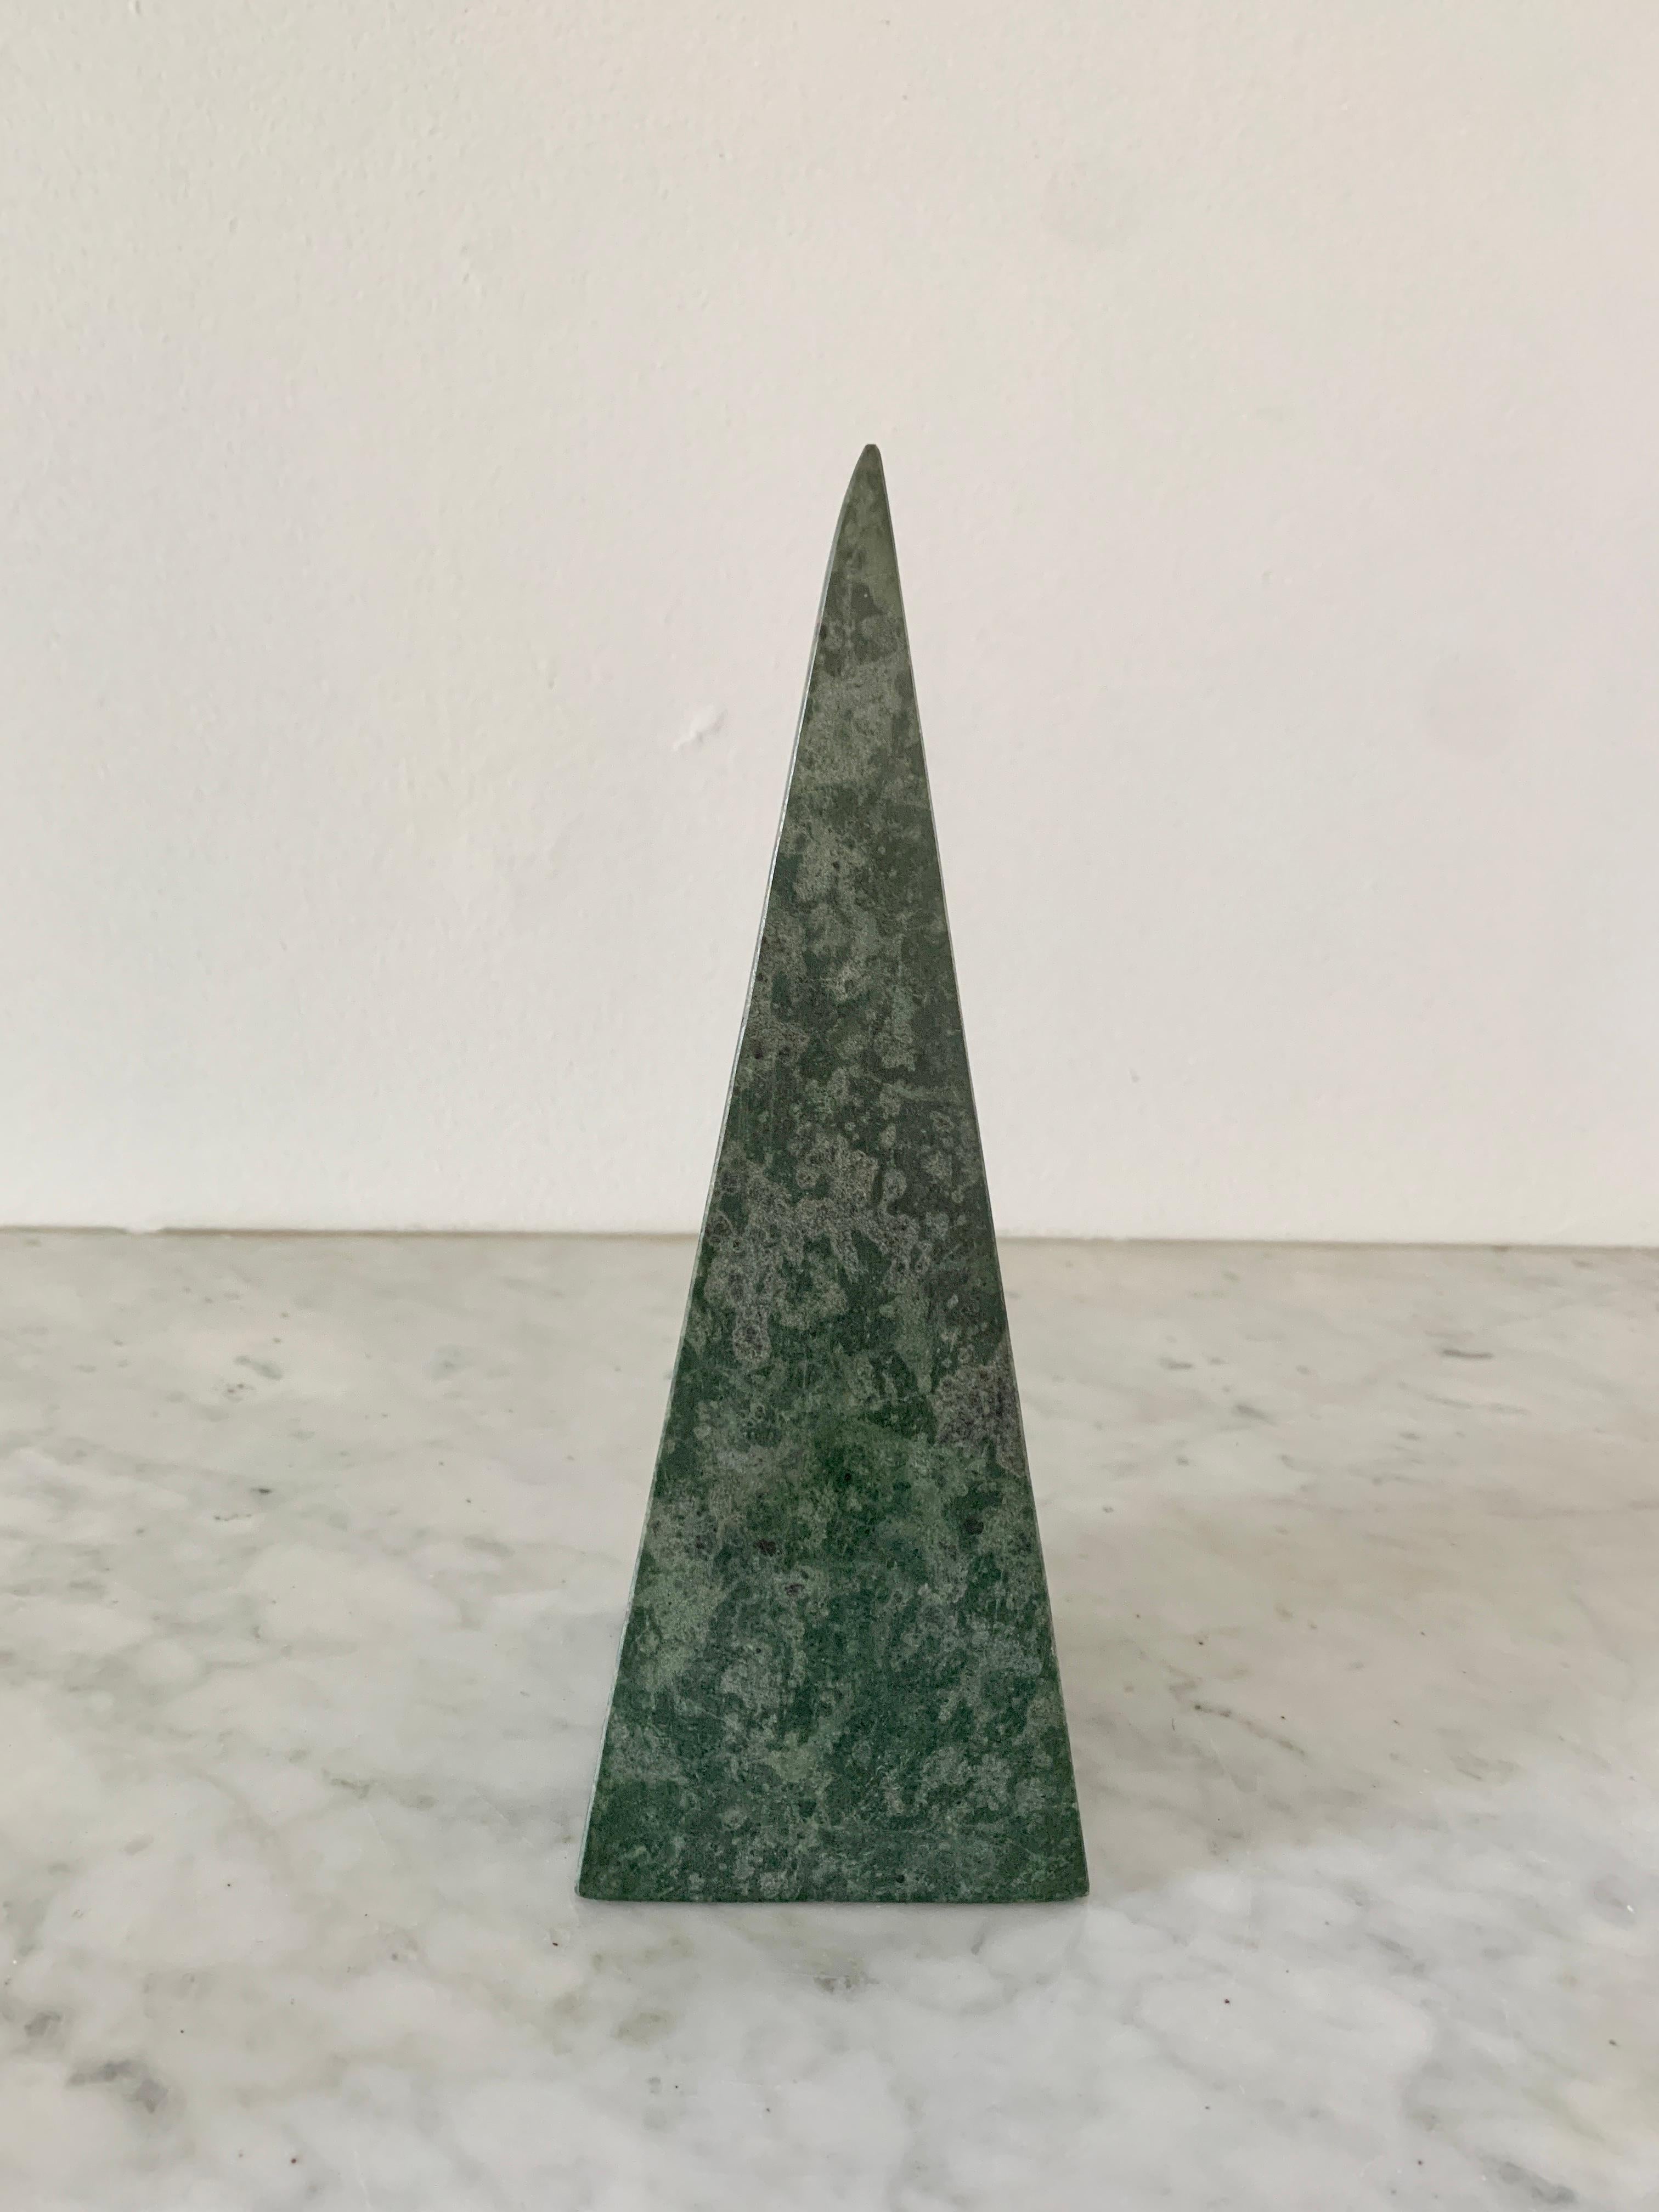 A stunning neoclassical Grand Tour style solid marble green & gray obelisk

Measures: 3